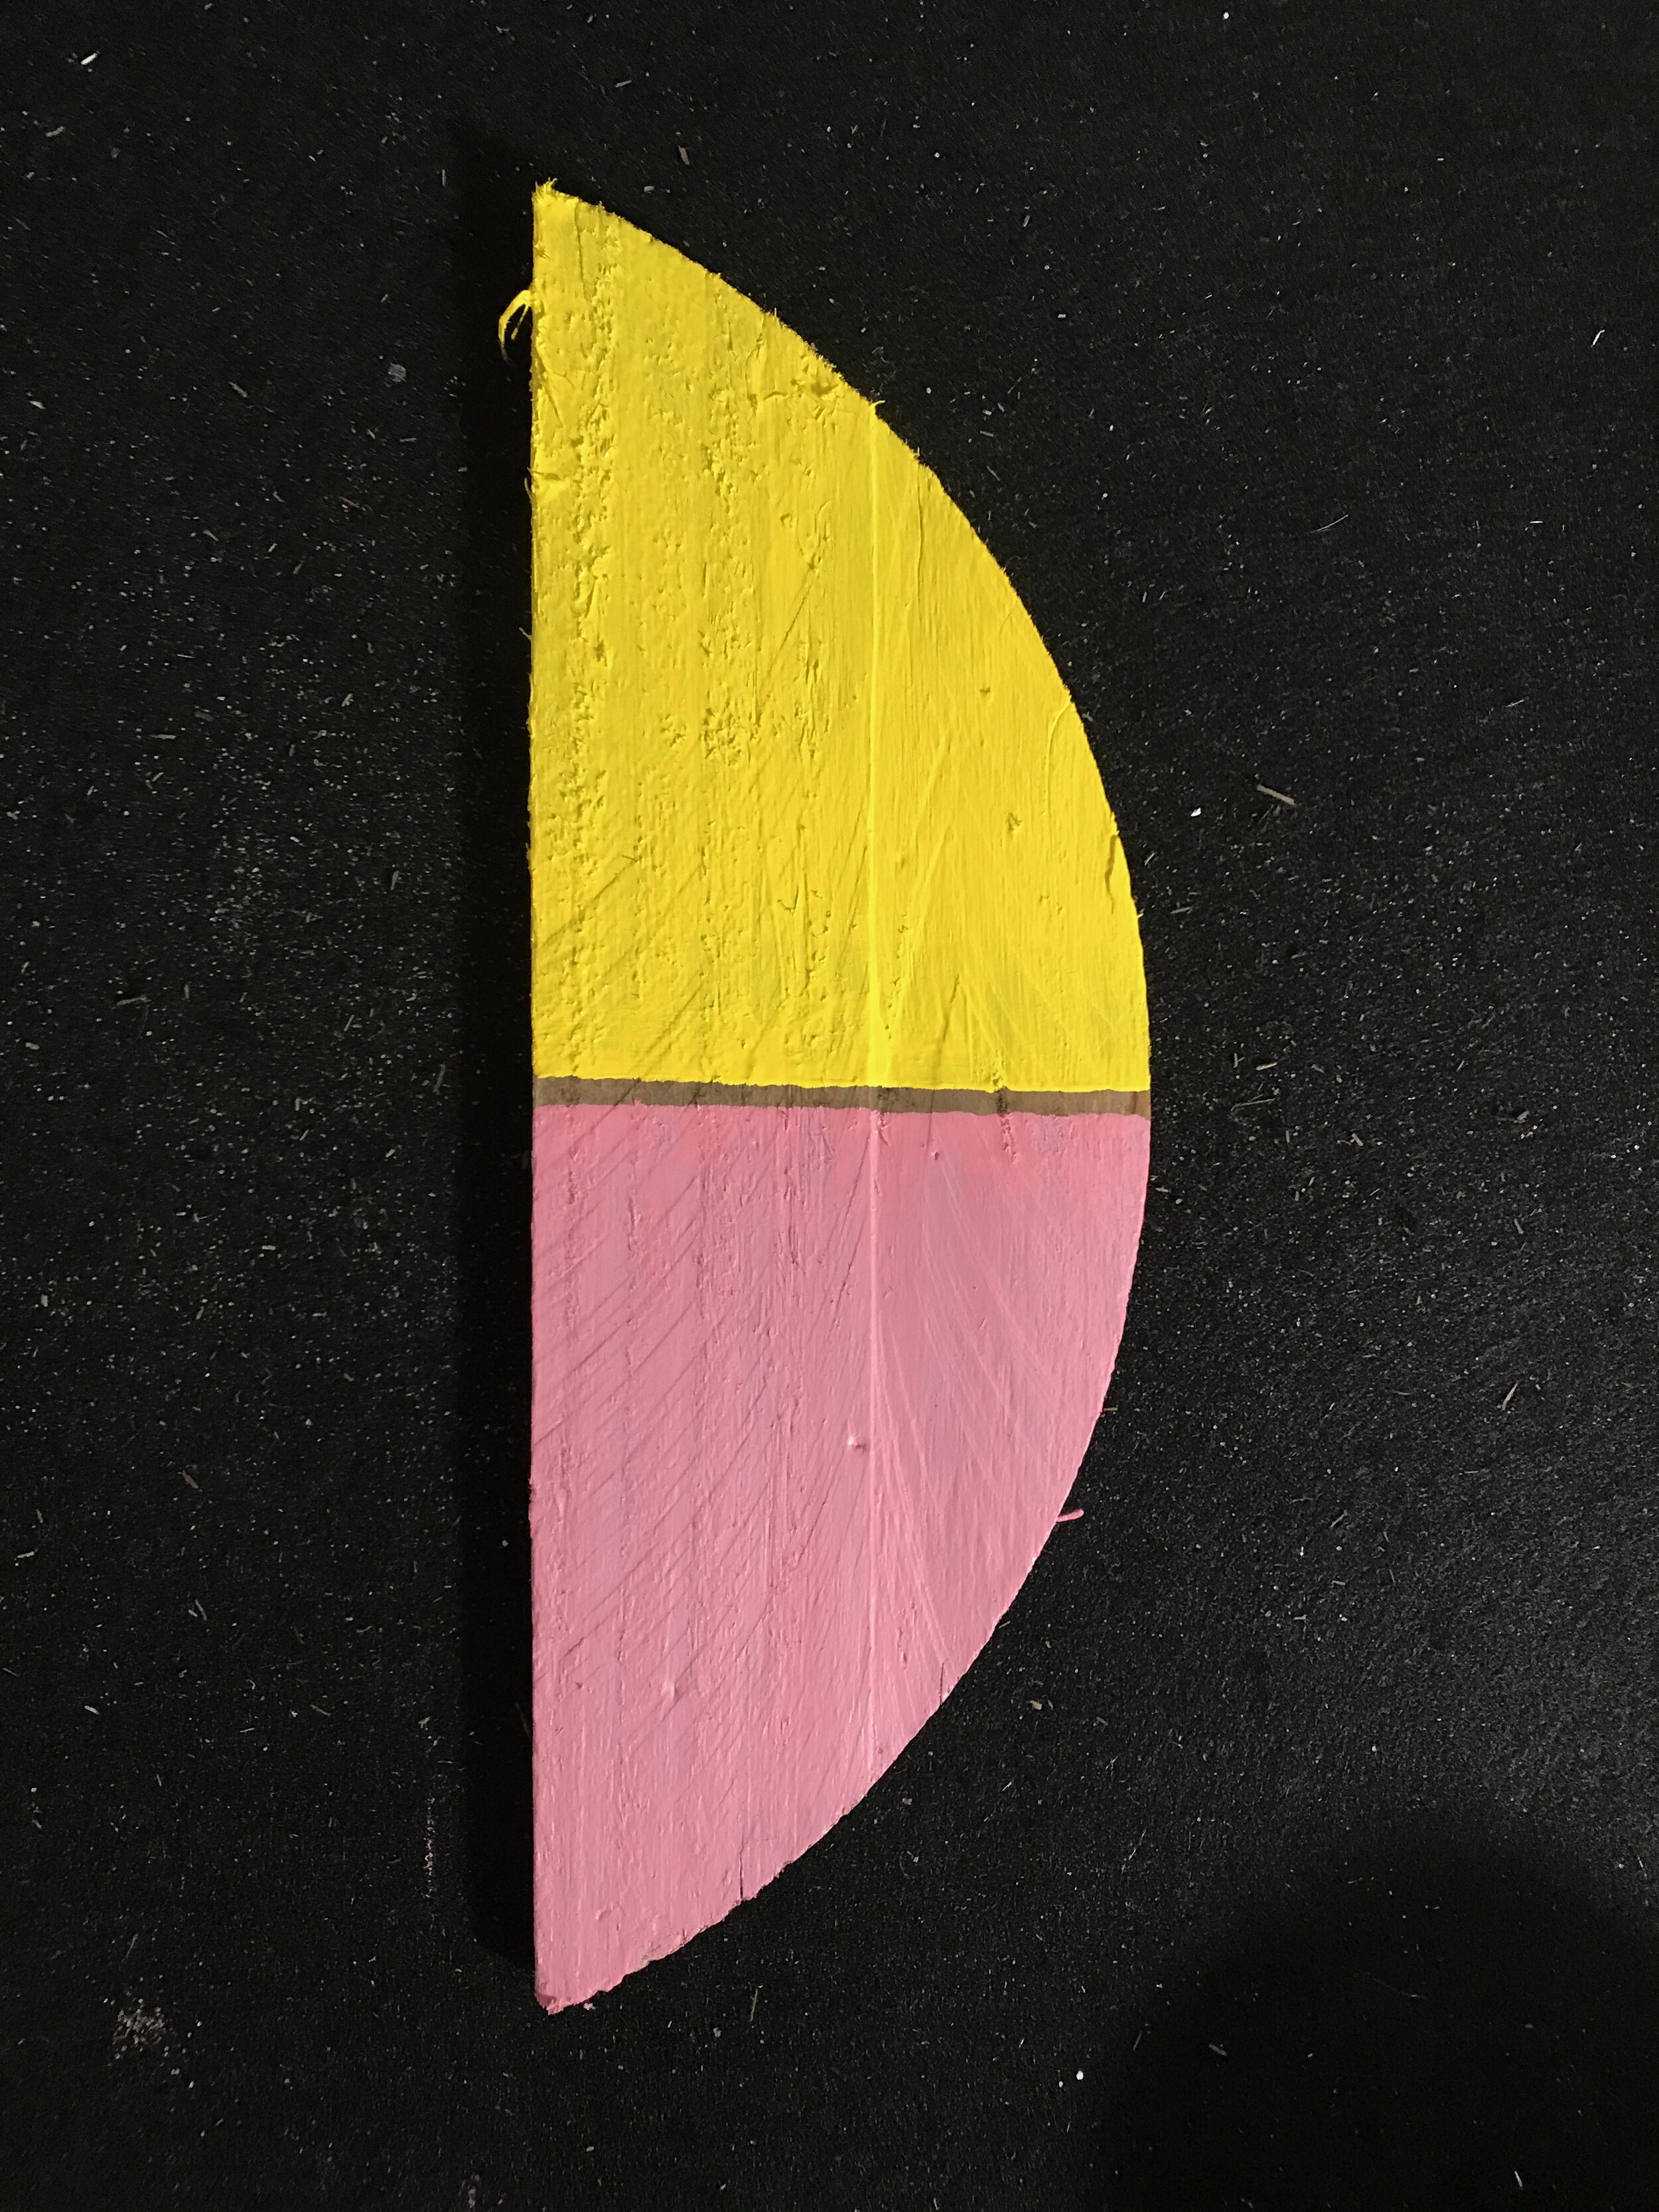 Untitled (balance), 2020, Acrylic on found wood collected at Rockaway Beach. 12 x 5 x .5 inches (Copy)